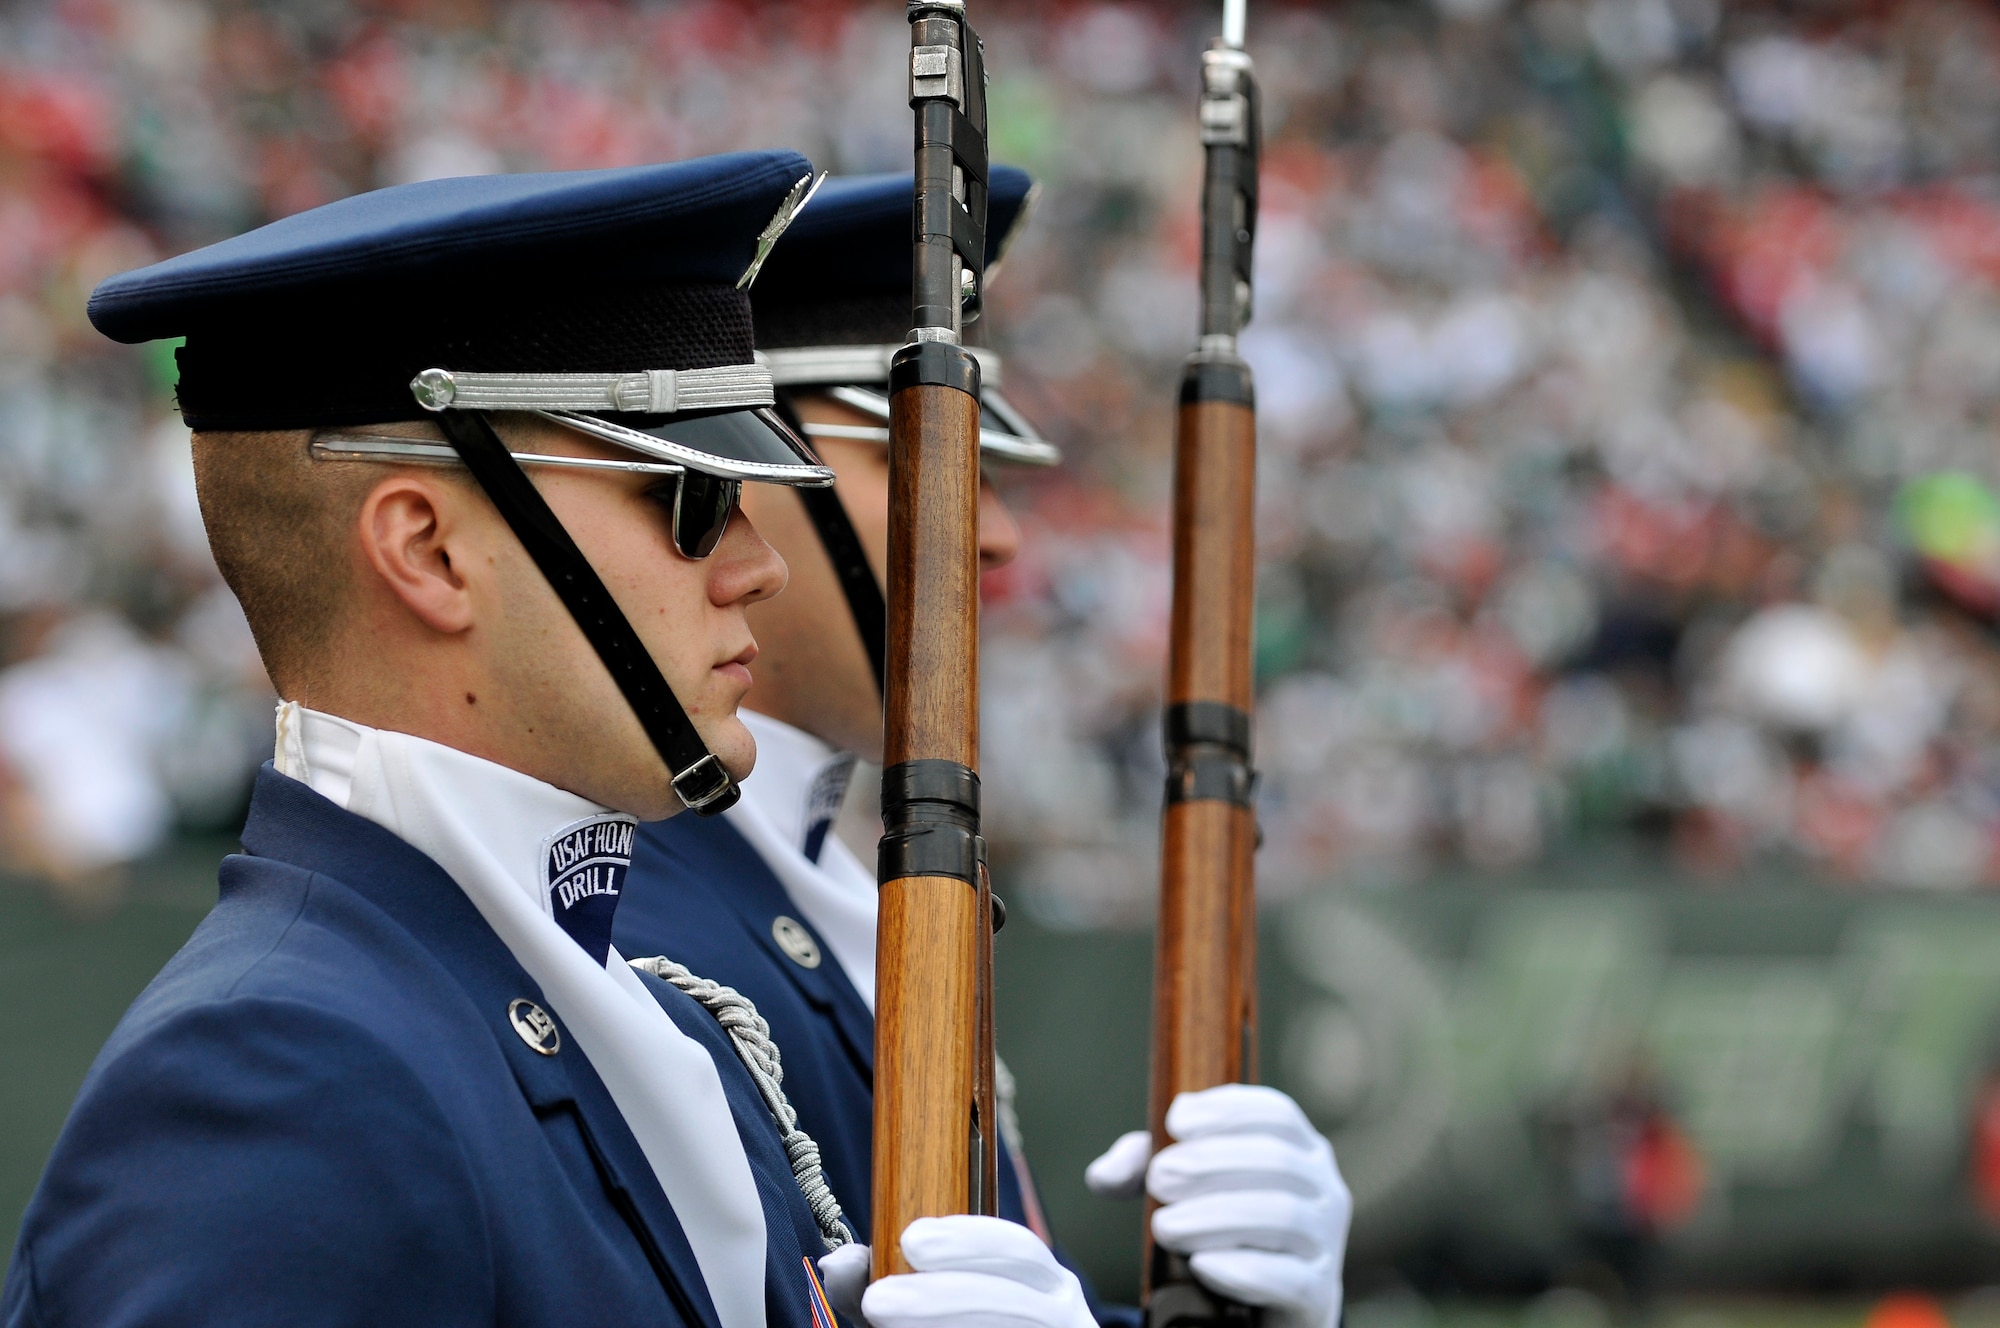 Airman 1st Class Michael Courtright, United States Air Force Honor Guard Drill Team, marches onto the field to perform during the halftime show at a New York Jets football game against the Jacksonville Jaguars at Giants Stadium Nov. 15, in East Rutherford, New Jersey. The Drill Team tours worldwide representing all Airmen while showcasing Air Force precision and professionalism. During the Air Force Honor Guard's 60-year history, their traveling component, the Drill Team, has performed in every state of the union and many countries abroad. (U.S. Air Force photo/Senior Airman Marleah Miller)